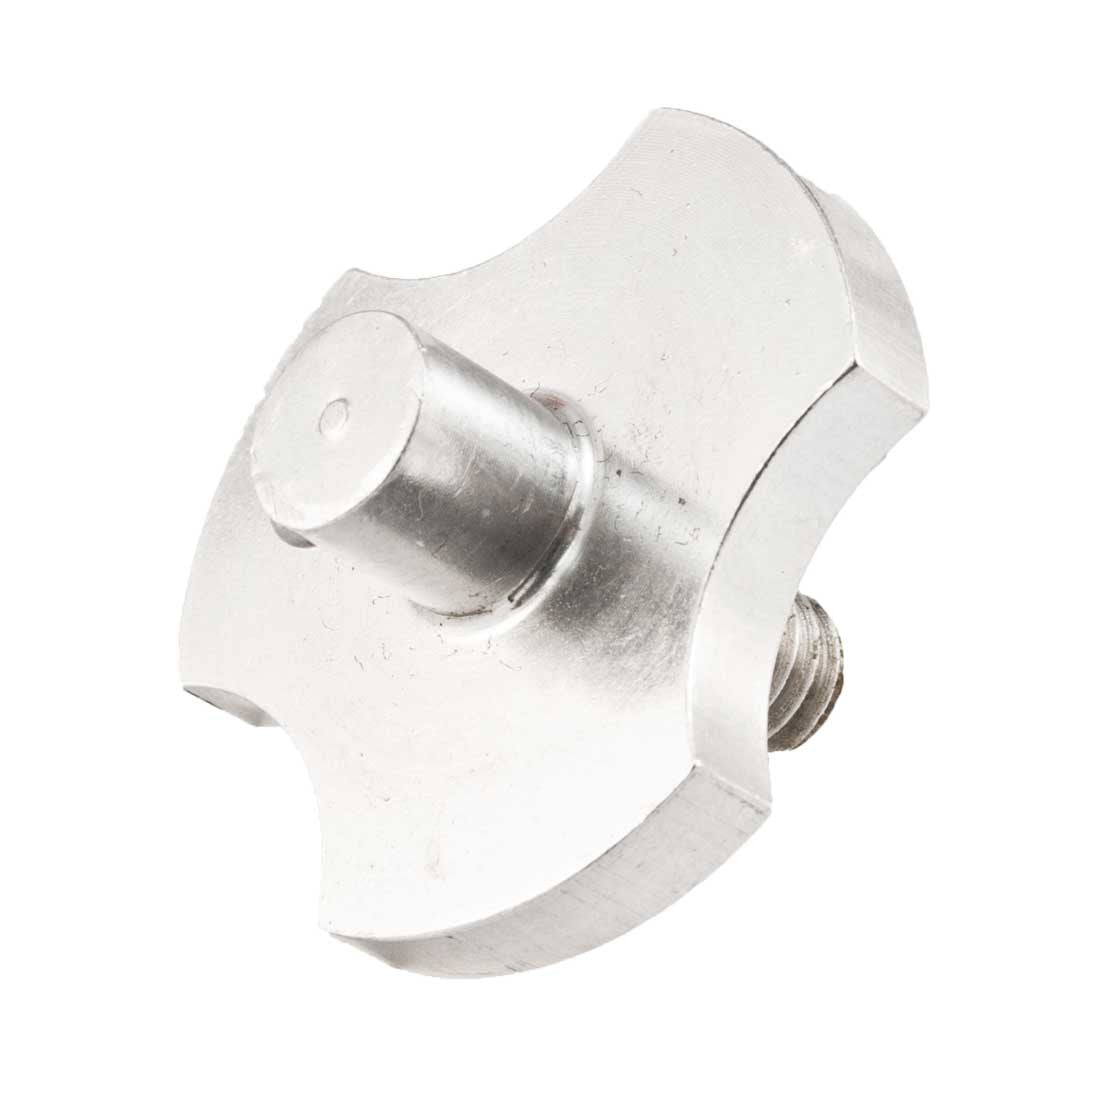 Small Aluminum Die Holder to fit BB Press(MADE USA)